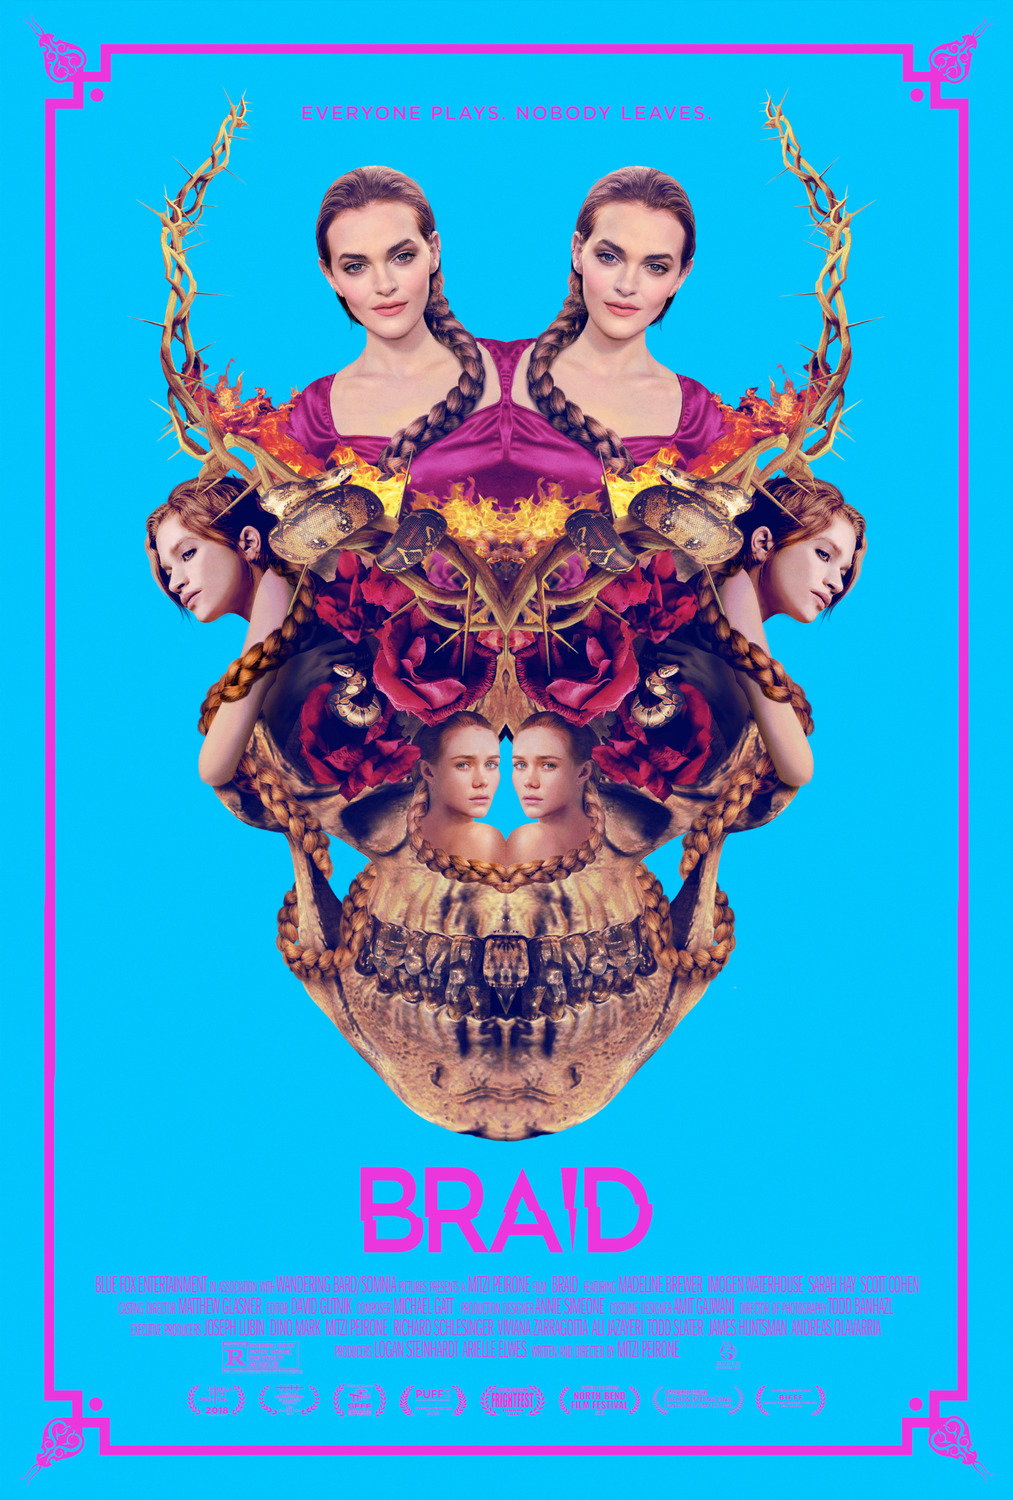 Extra Large Movie Poster Image for Braid 